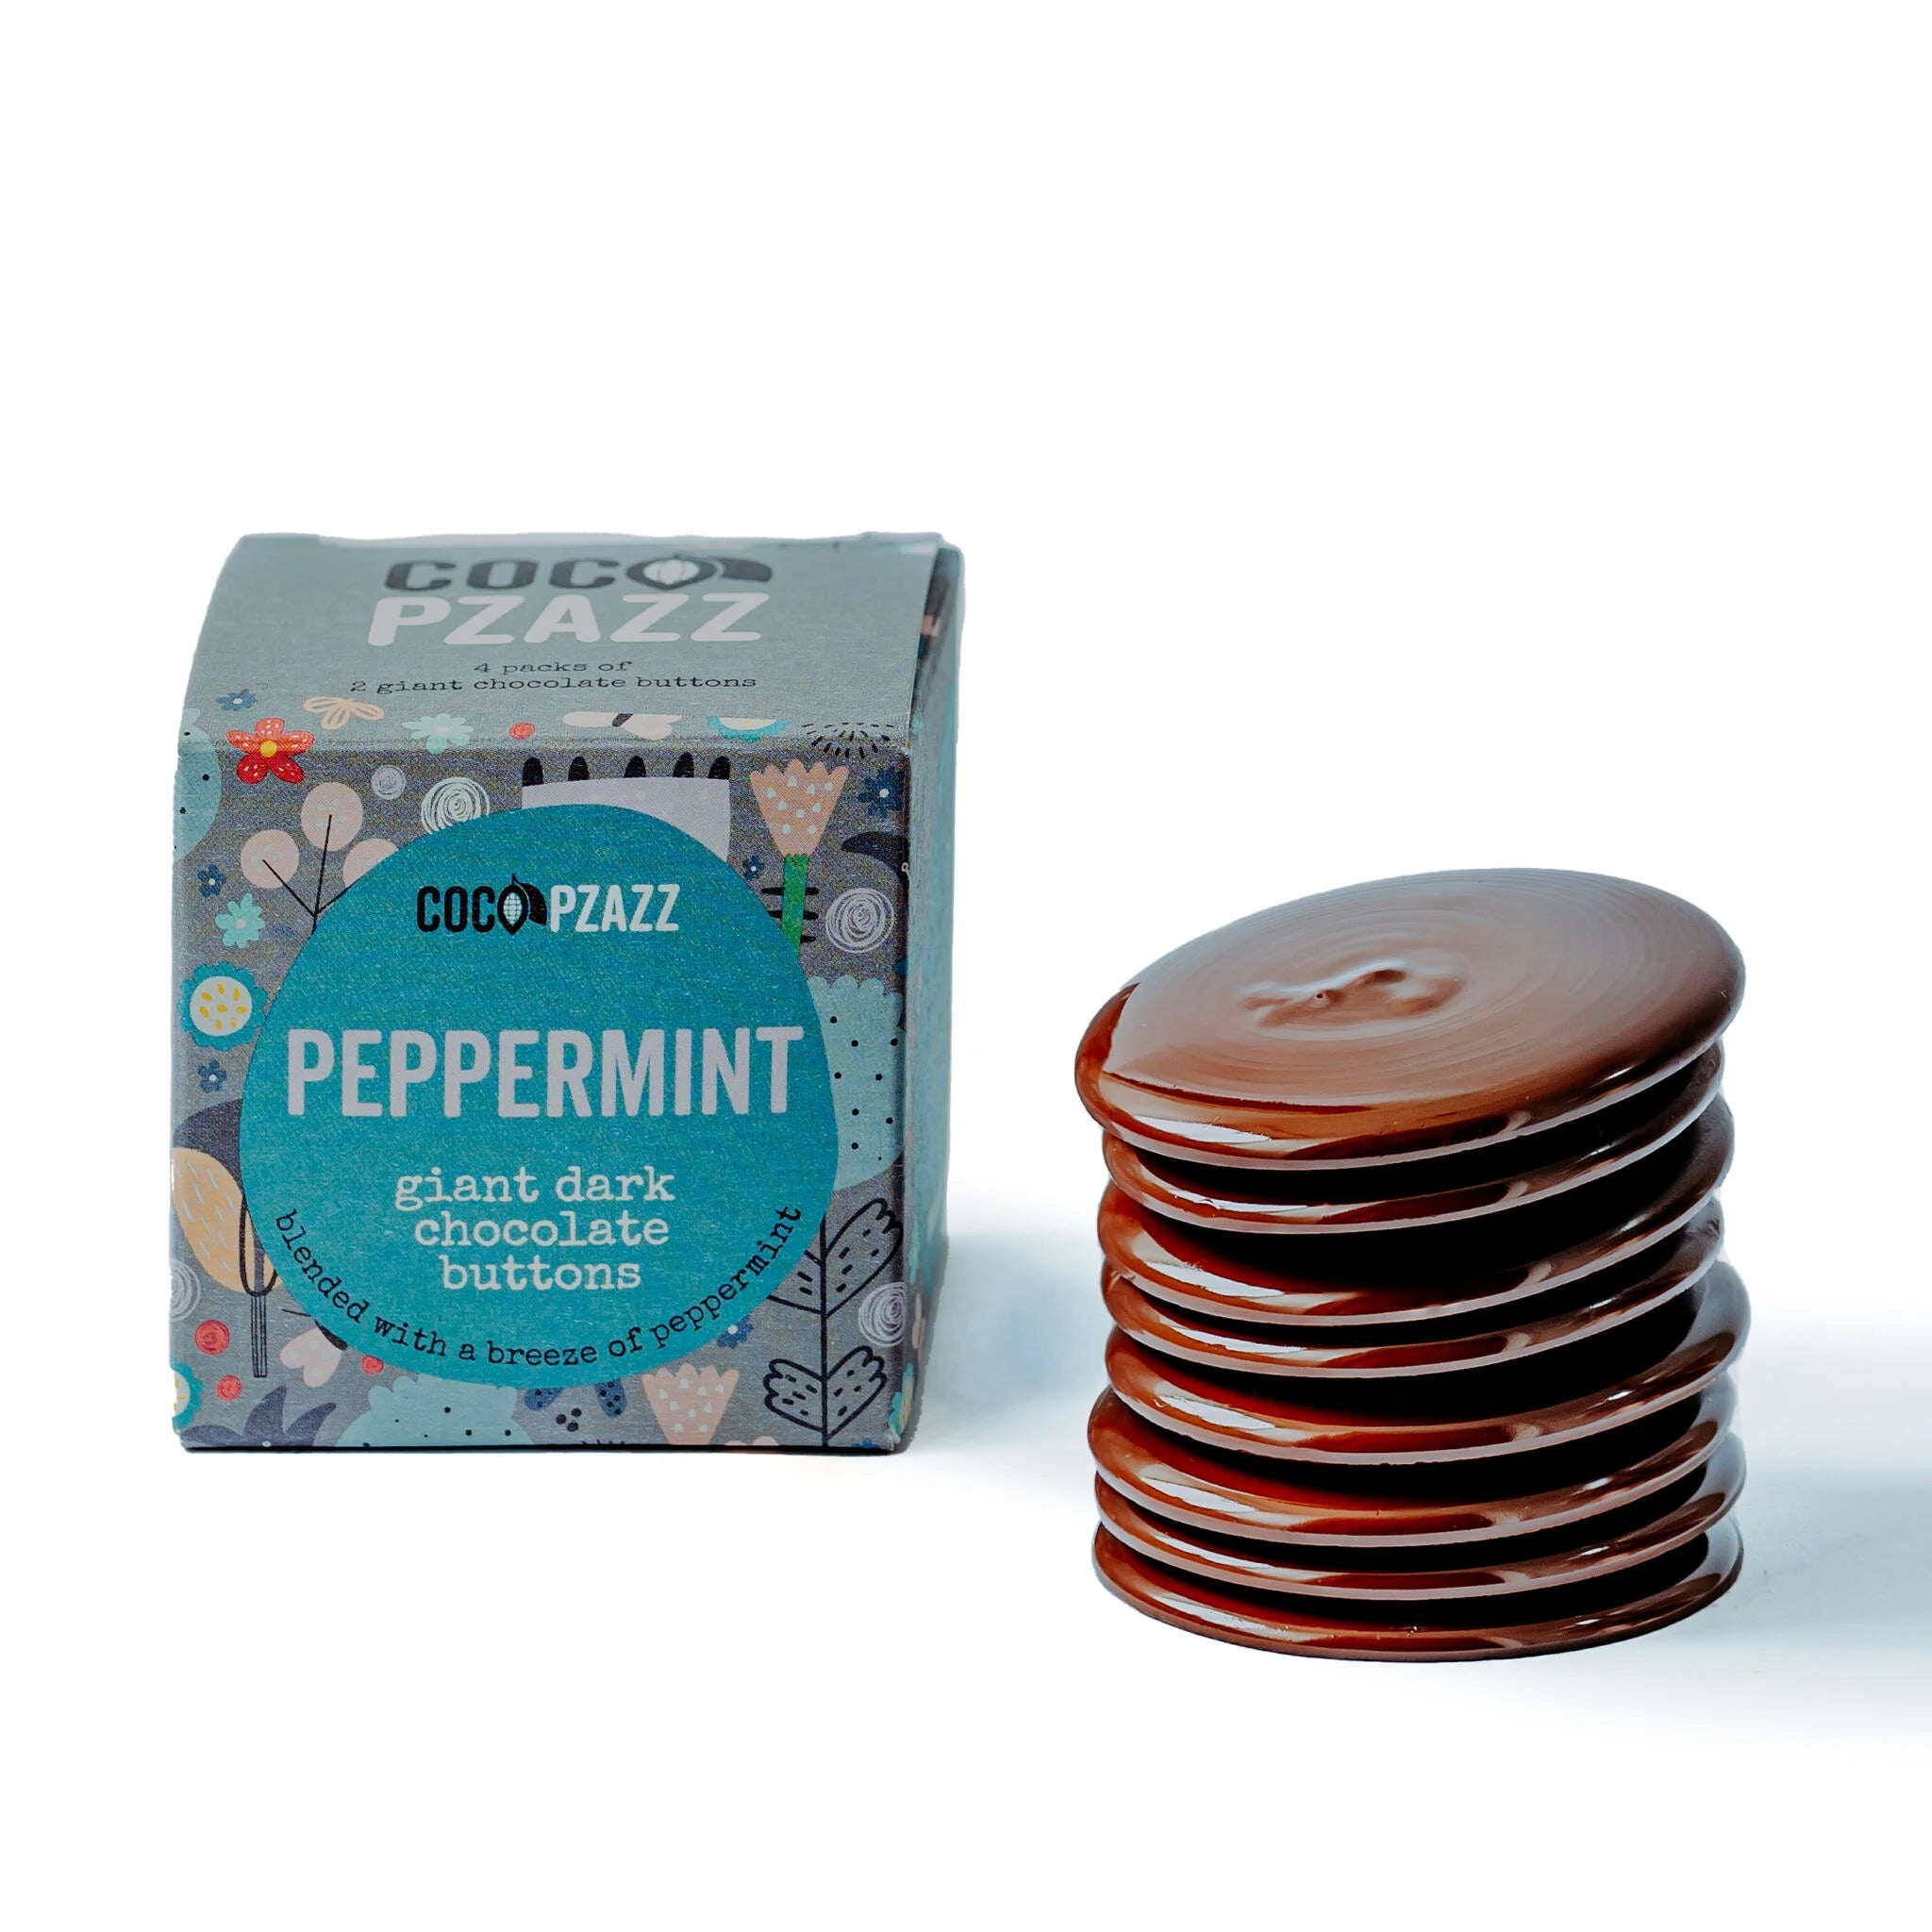 Giant Dark Chocolate Buttons in Peppermint by Coco Pzazz